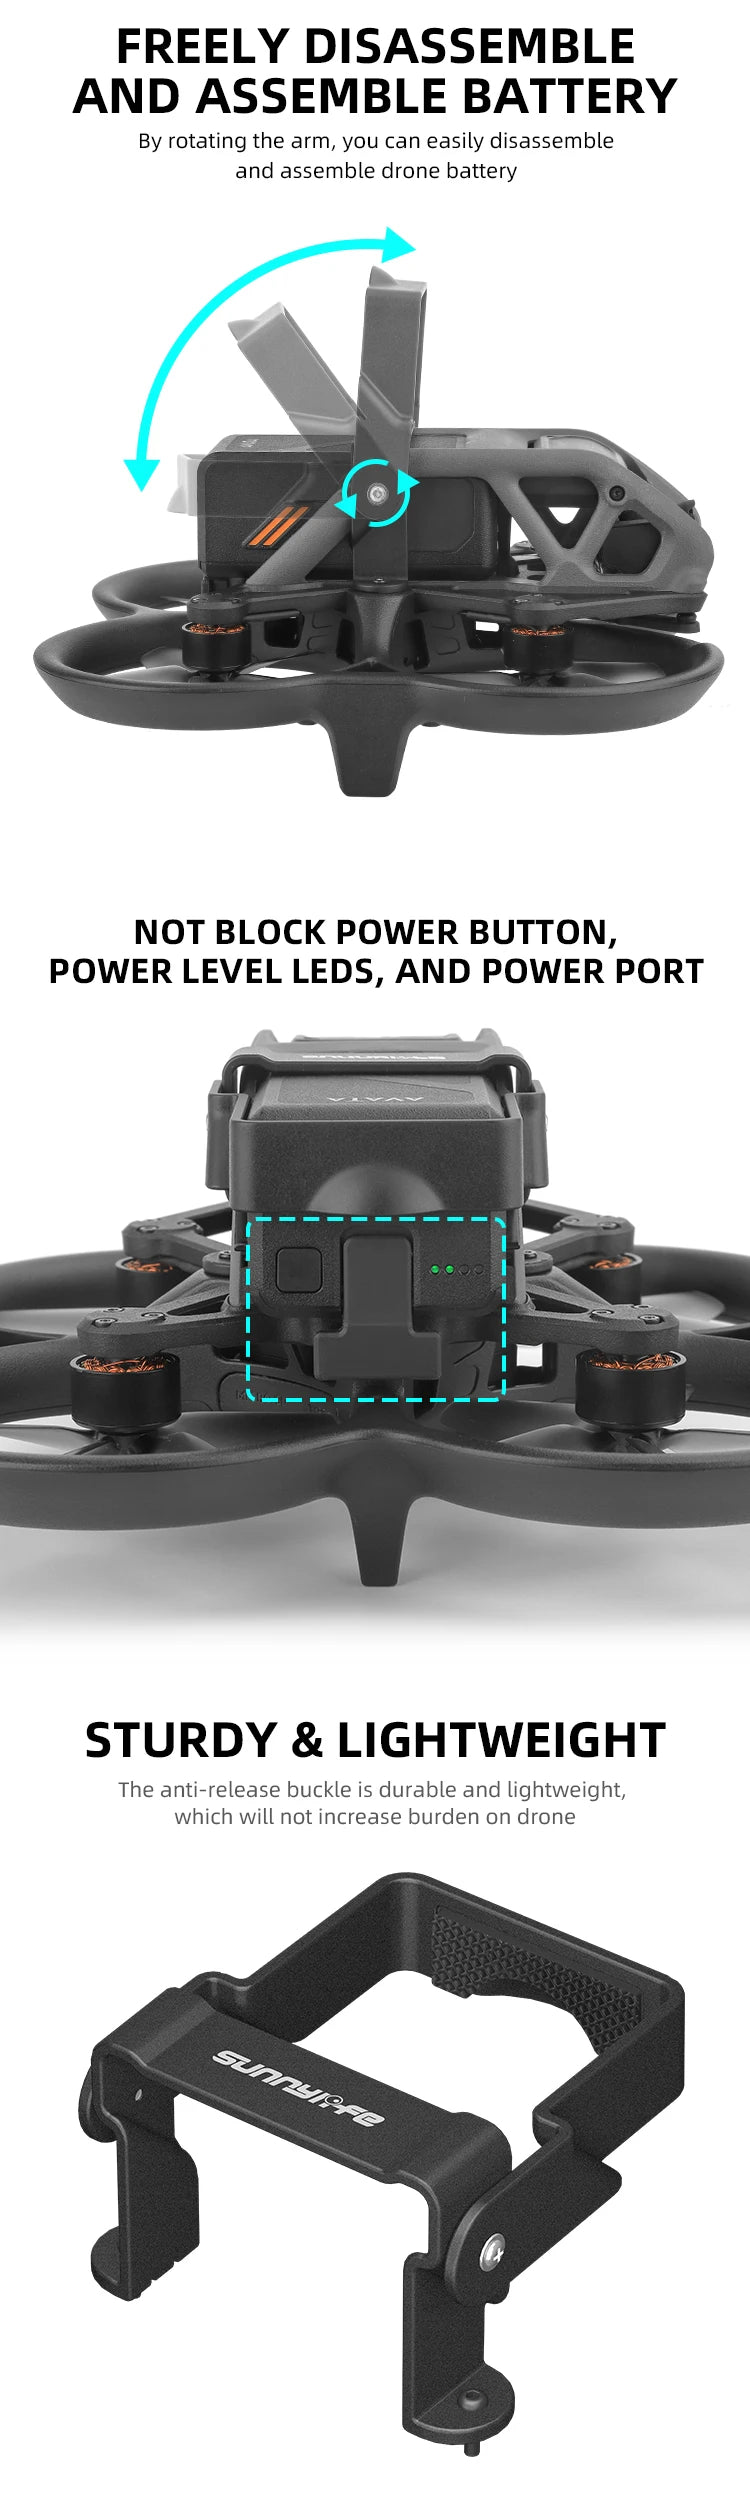 Battery Anti-release Buckle, the anti-release buckle is durable and lightweight, which will not increase burden on drone .